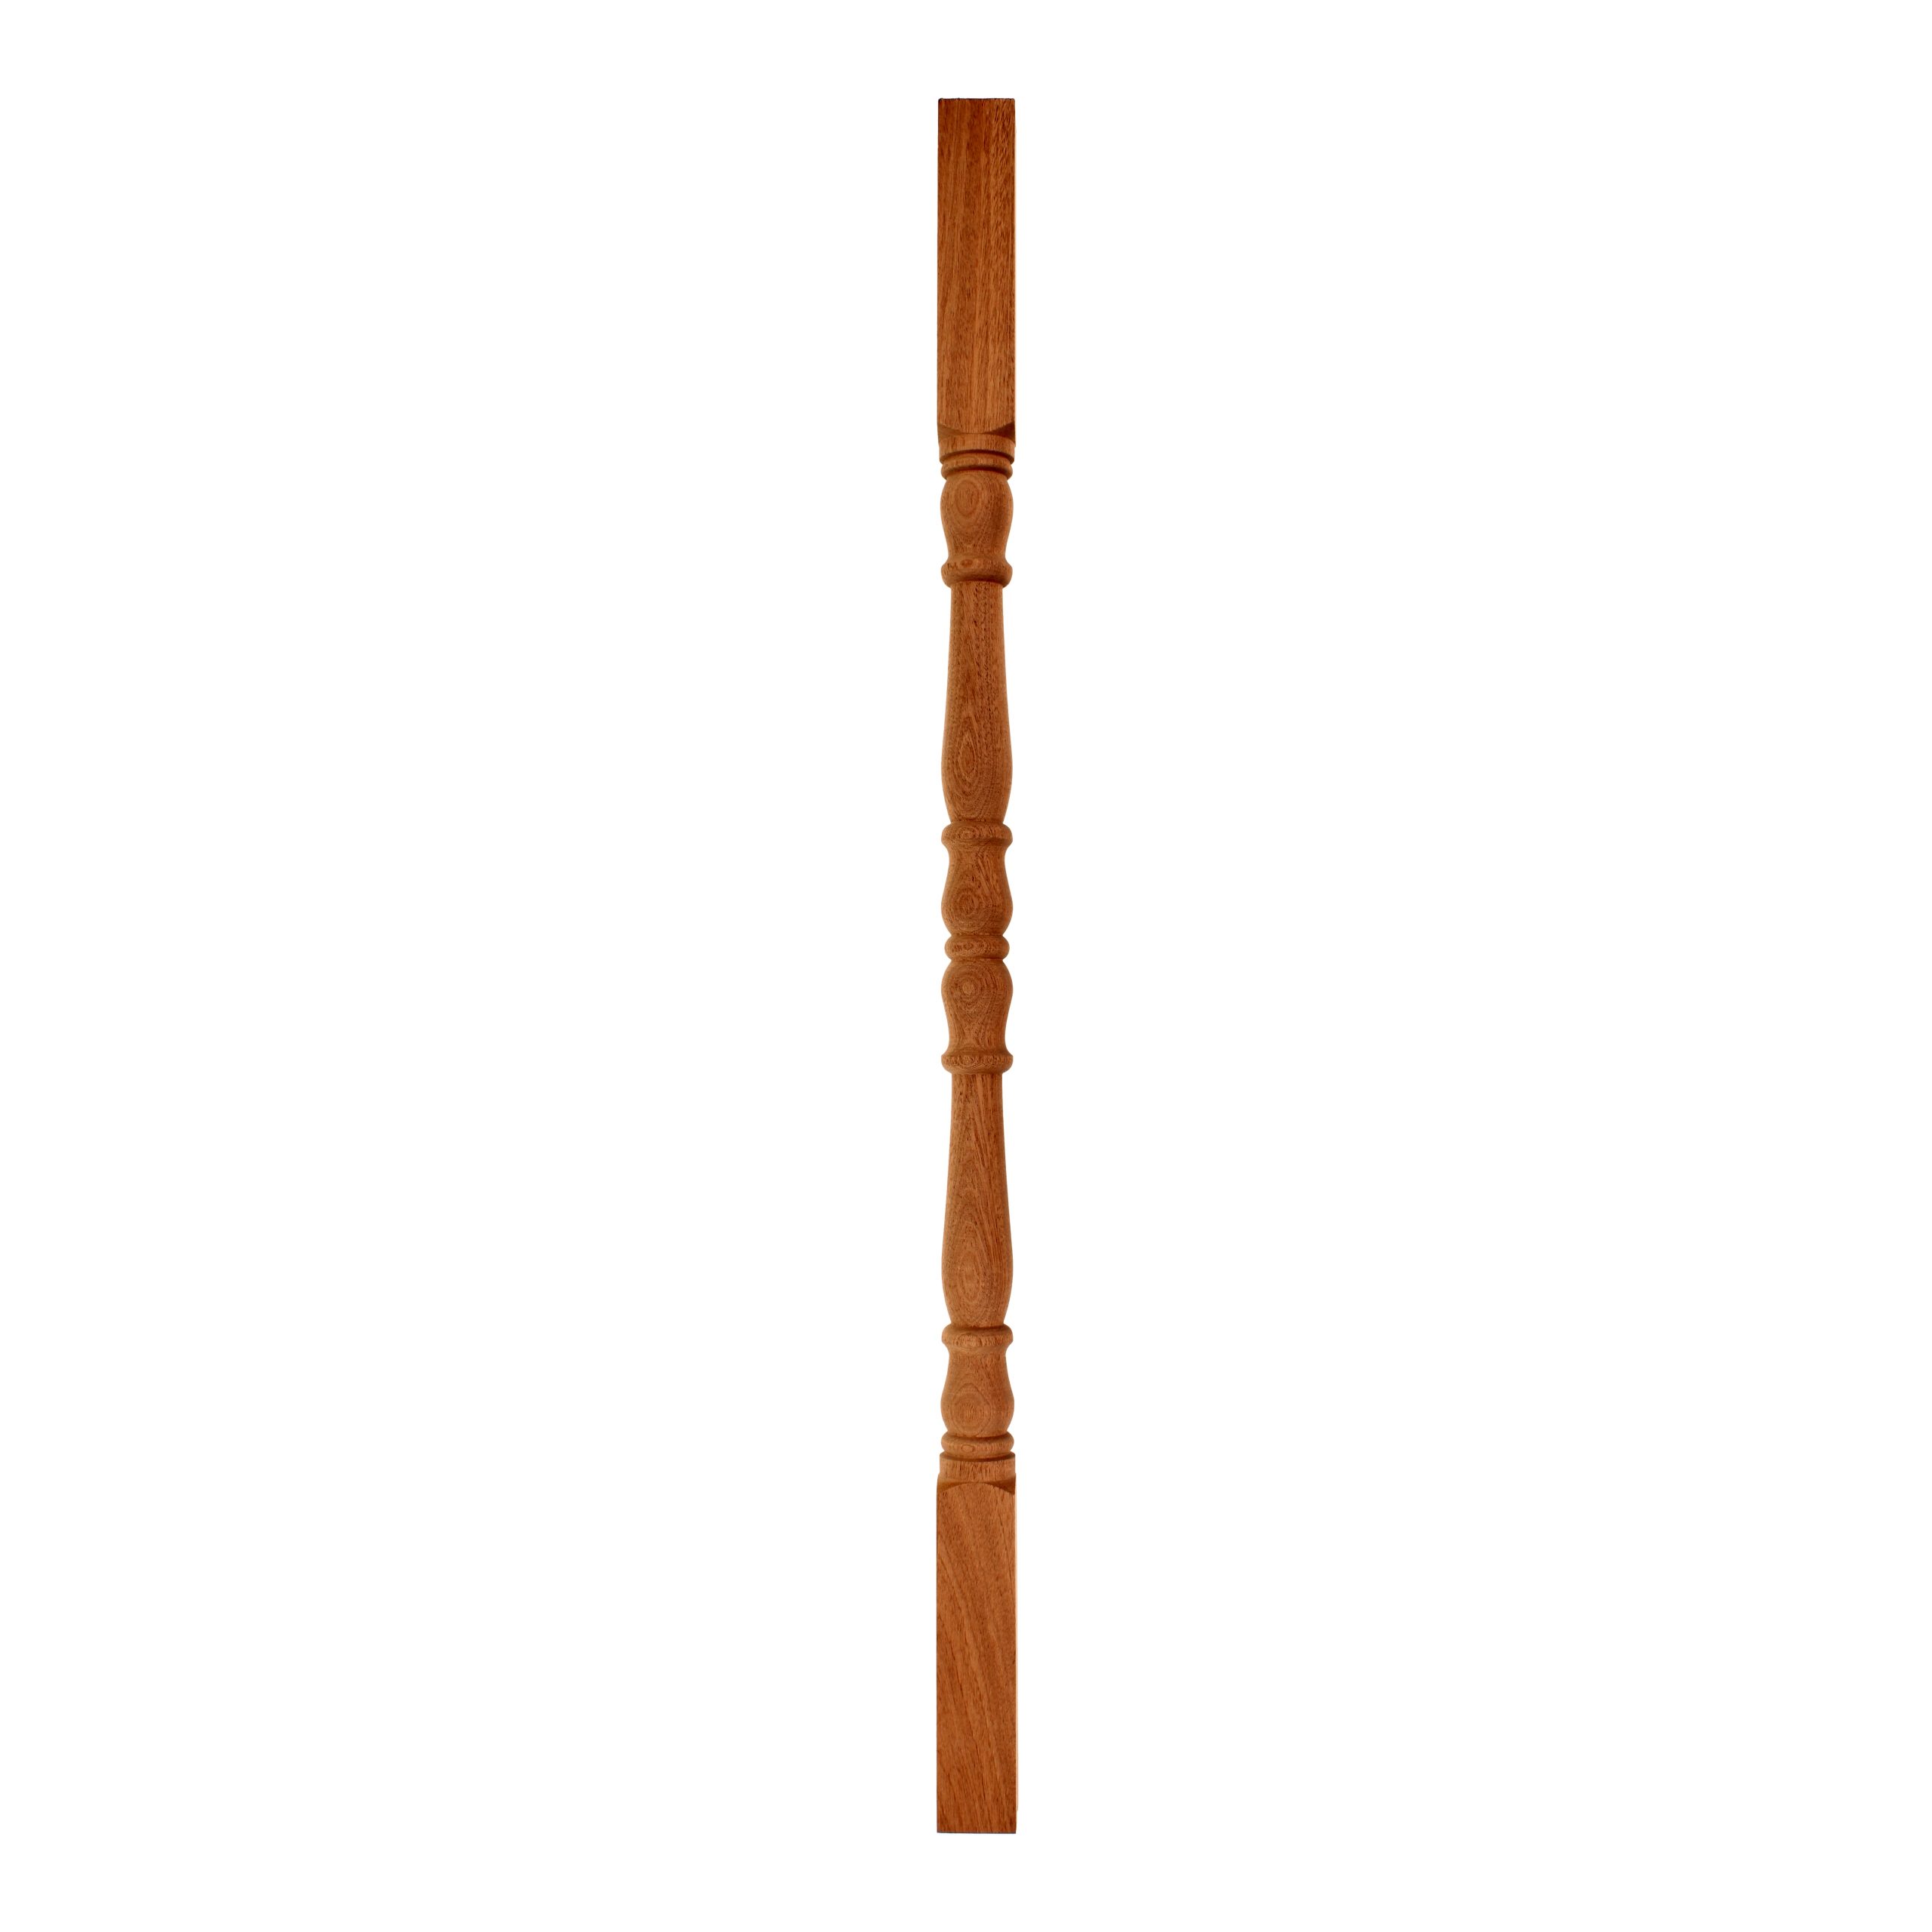 Mahogany-No 1-Tulip-41mm x 900 - Wooden staircase spindle.